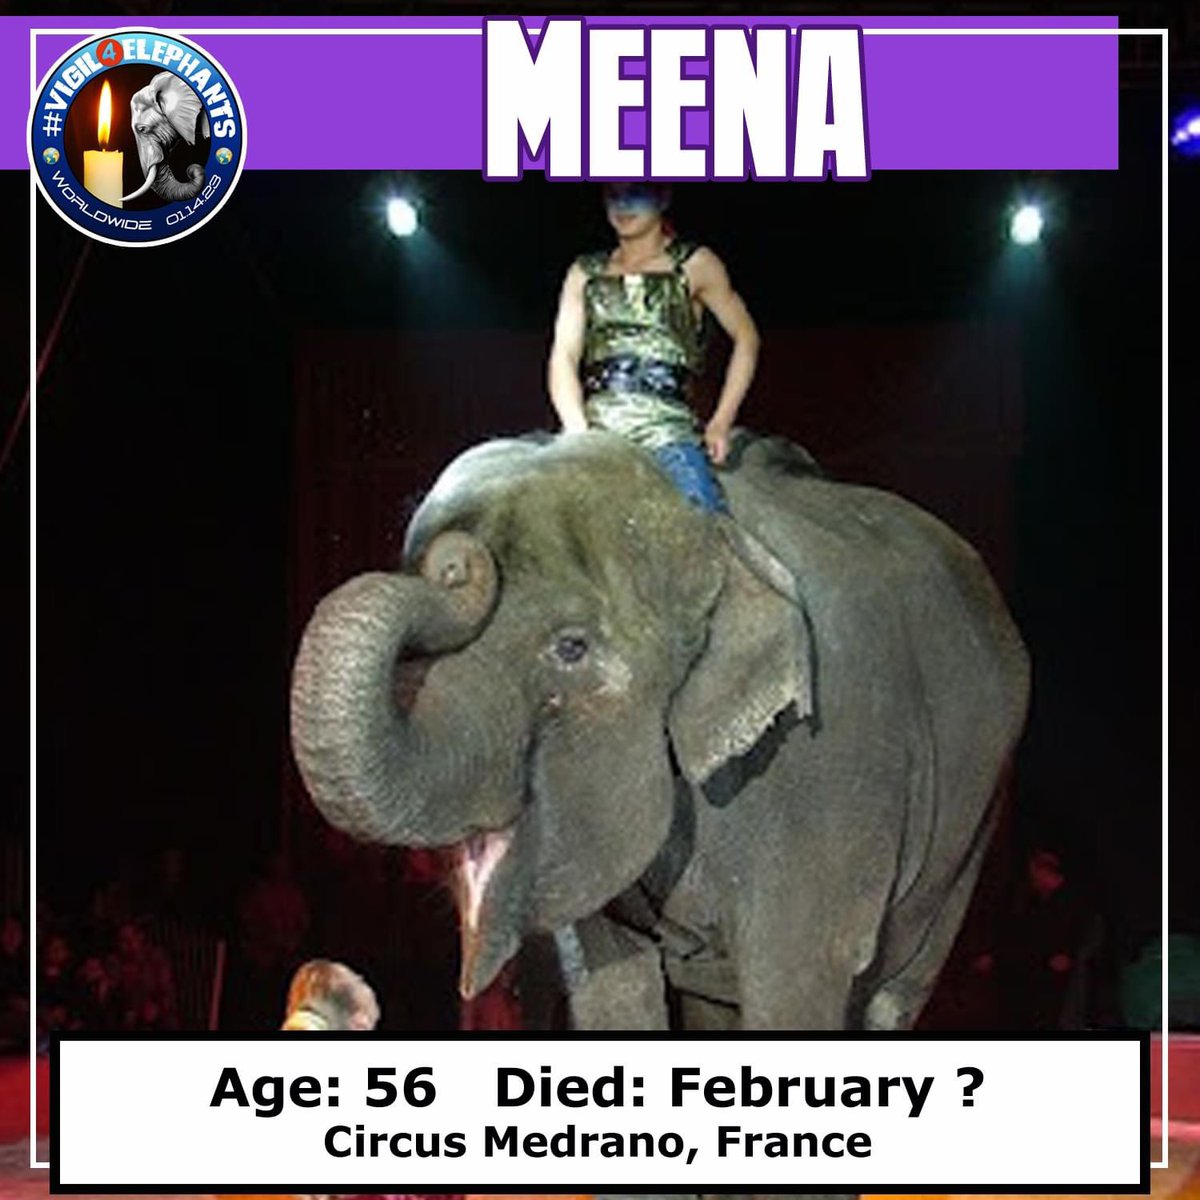 Meena was born wild in 1966. 1973 she was at the Circus Chipperfield. Sadly, Meena passed away from an unspecified cause in 2022.

#RIPMeena. You were denied freedom & happiness which were your birthright! We will remember you on this solemn vigil day. #Vigil4Elephants